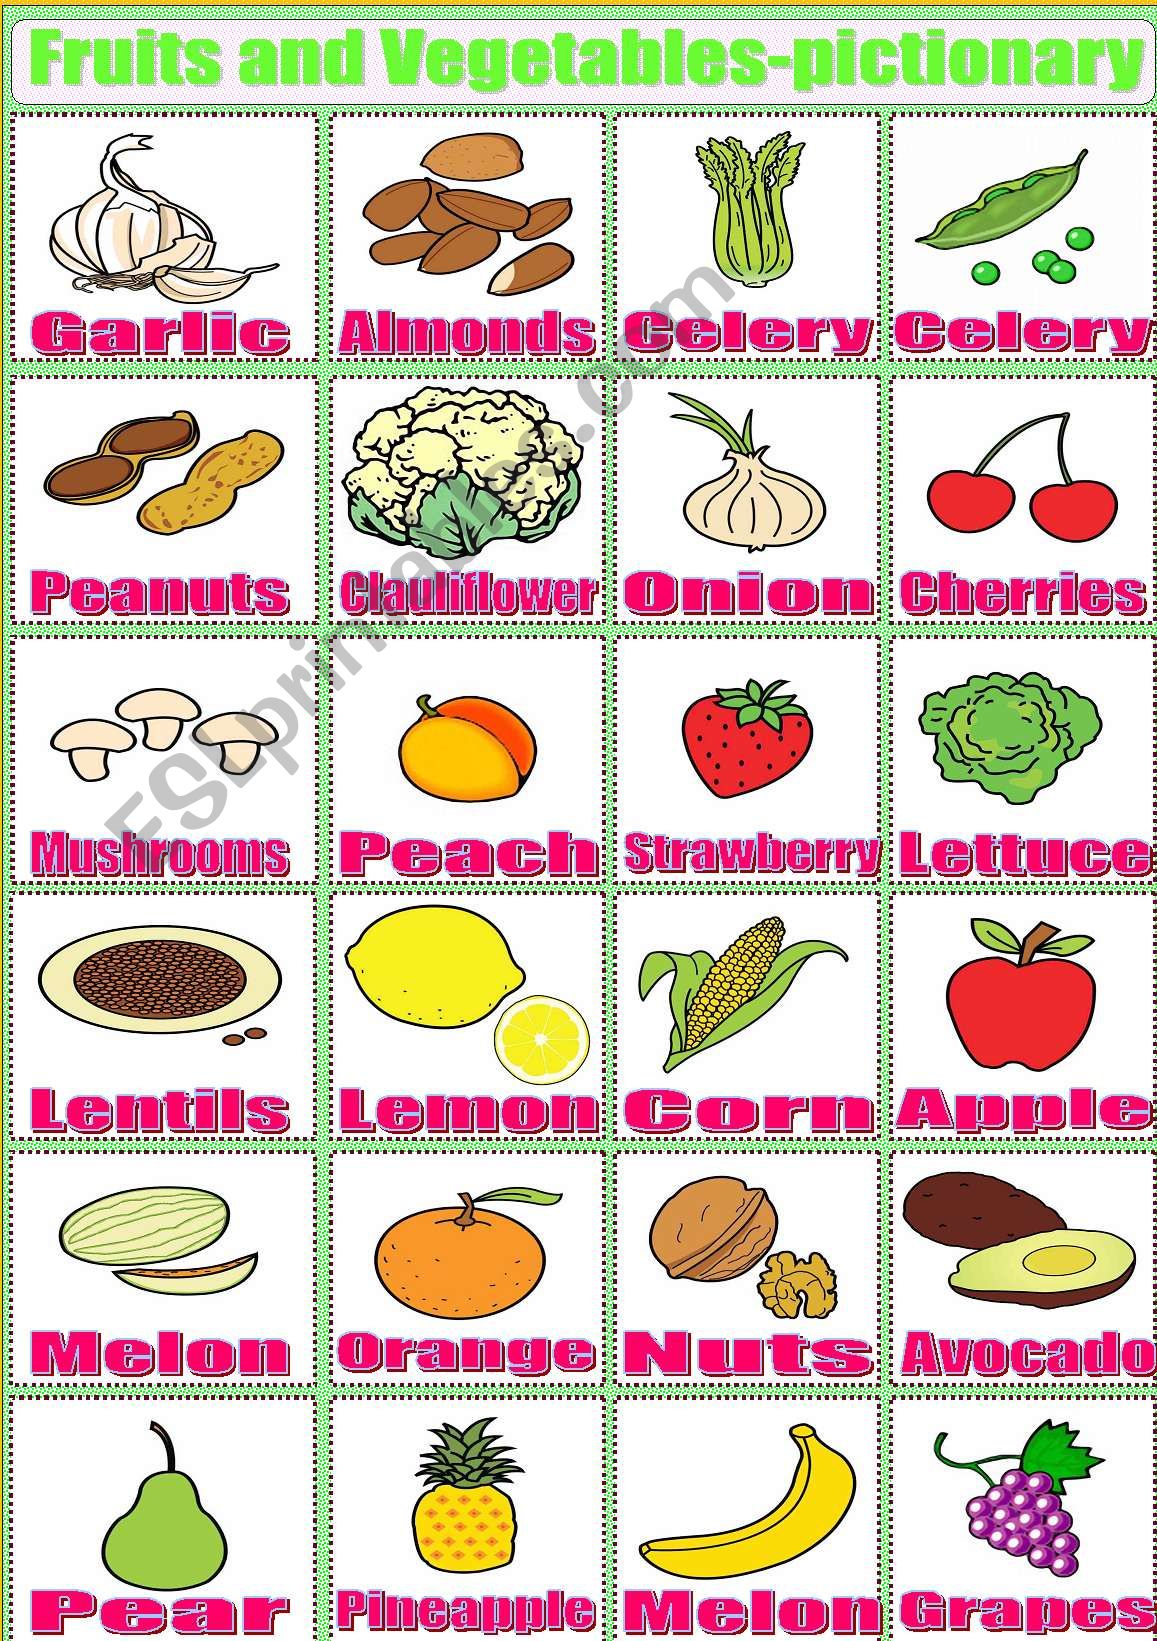 fruits and vegetables-pictionary